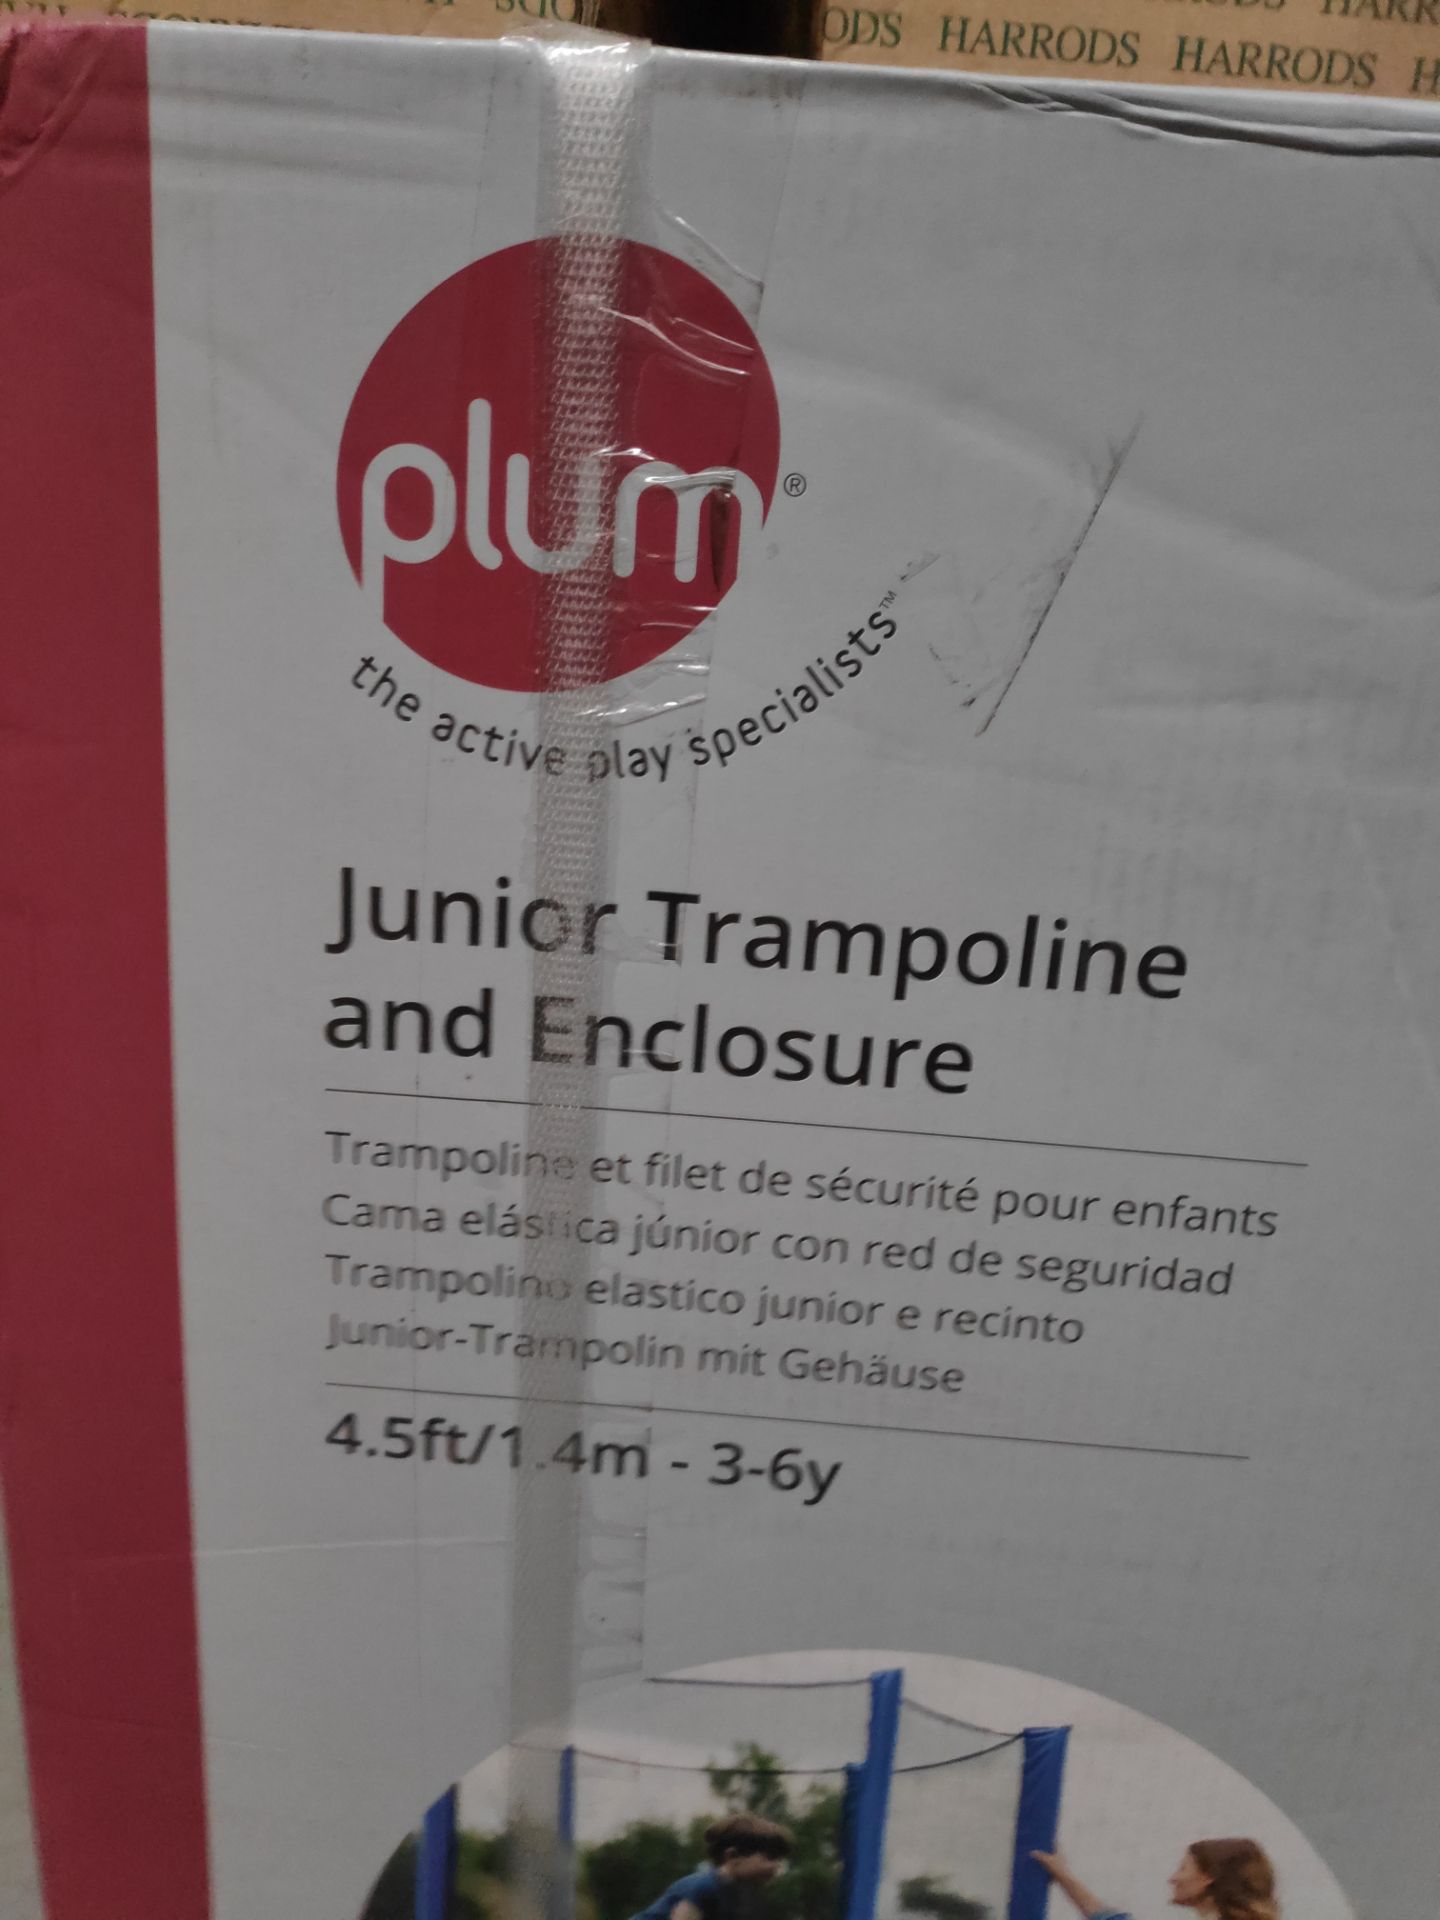 1 x Plum 1.4m Junior Trampoline and Enclosure in Pink - New/Boxed - Image 9 of 10